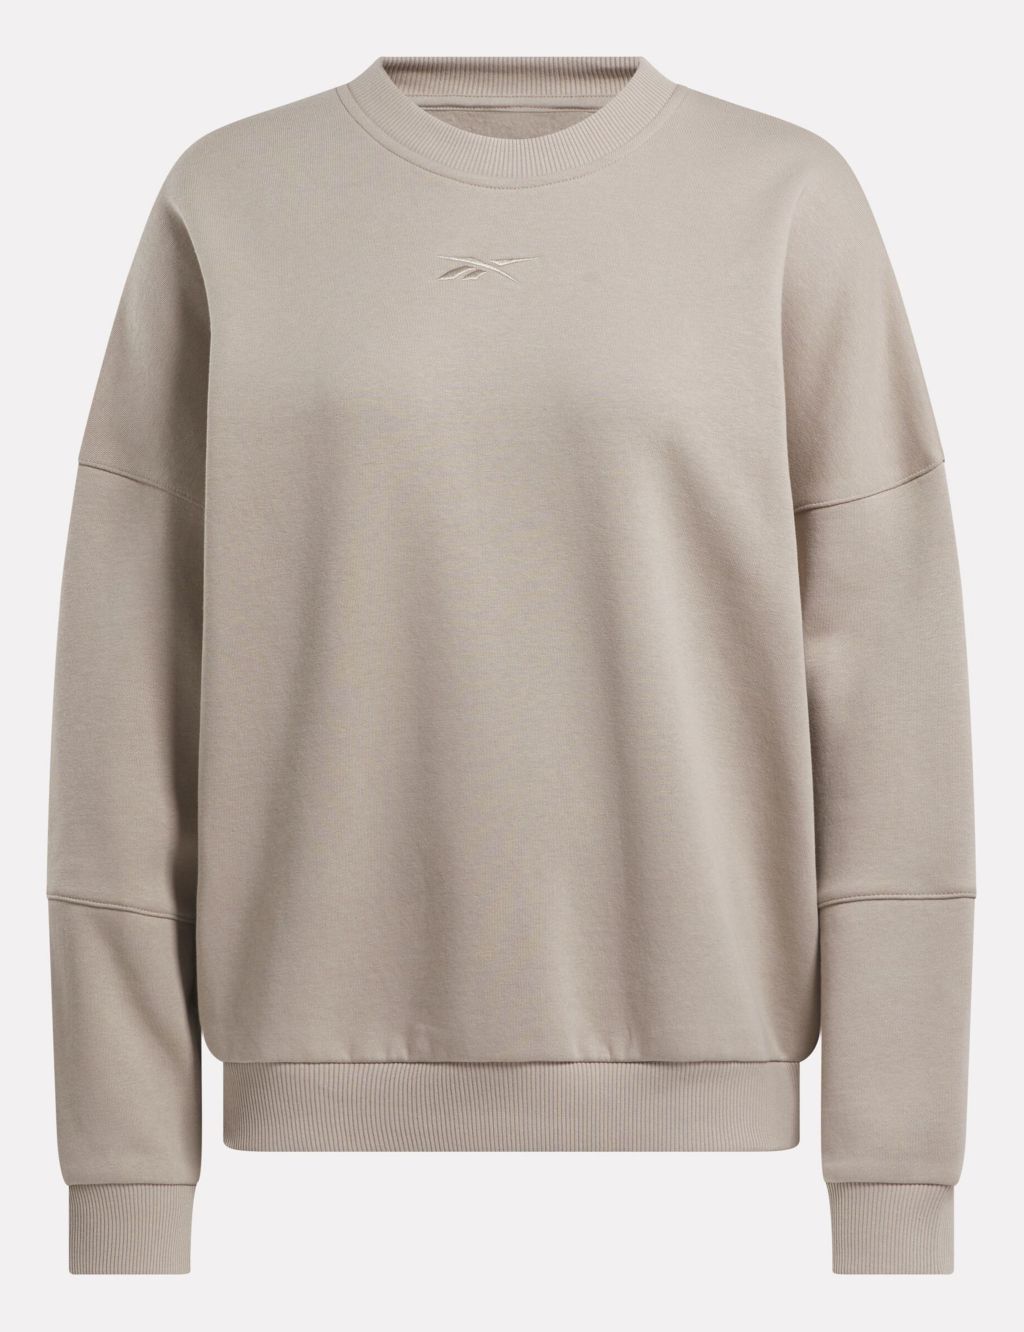 This Best-Selling Oversized Sweatshirt Is 40% Off at